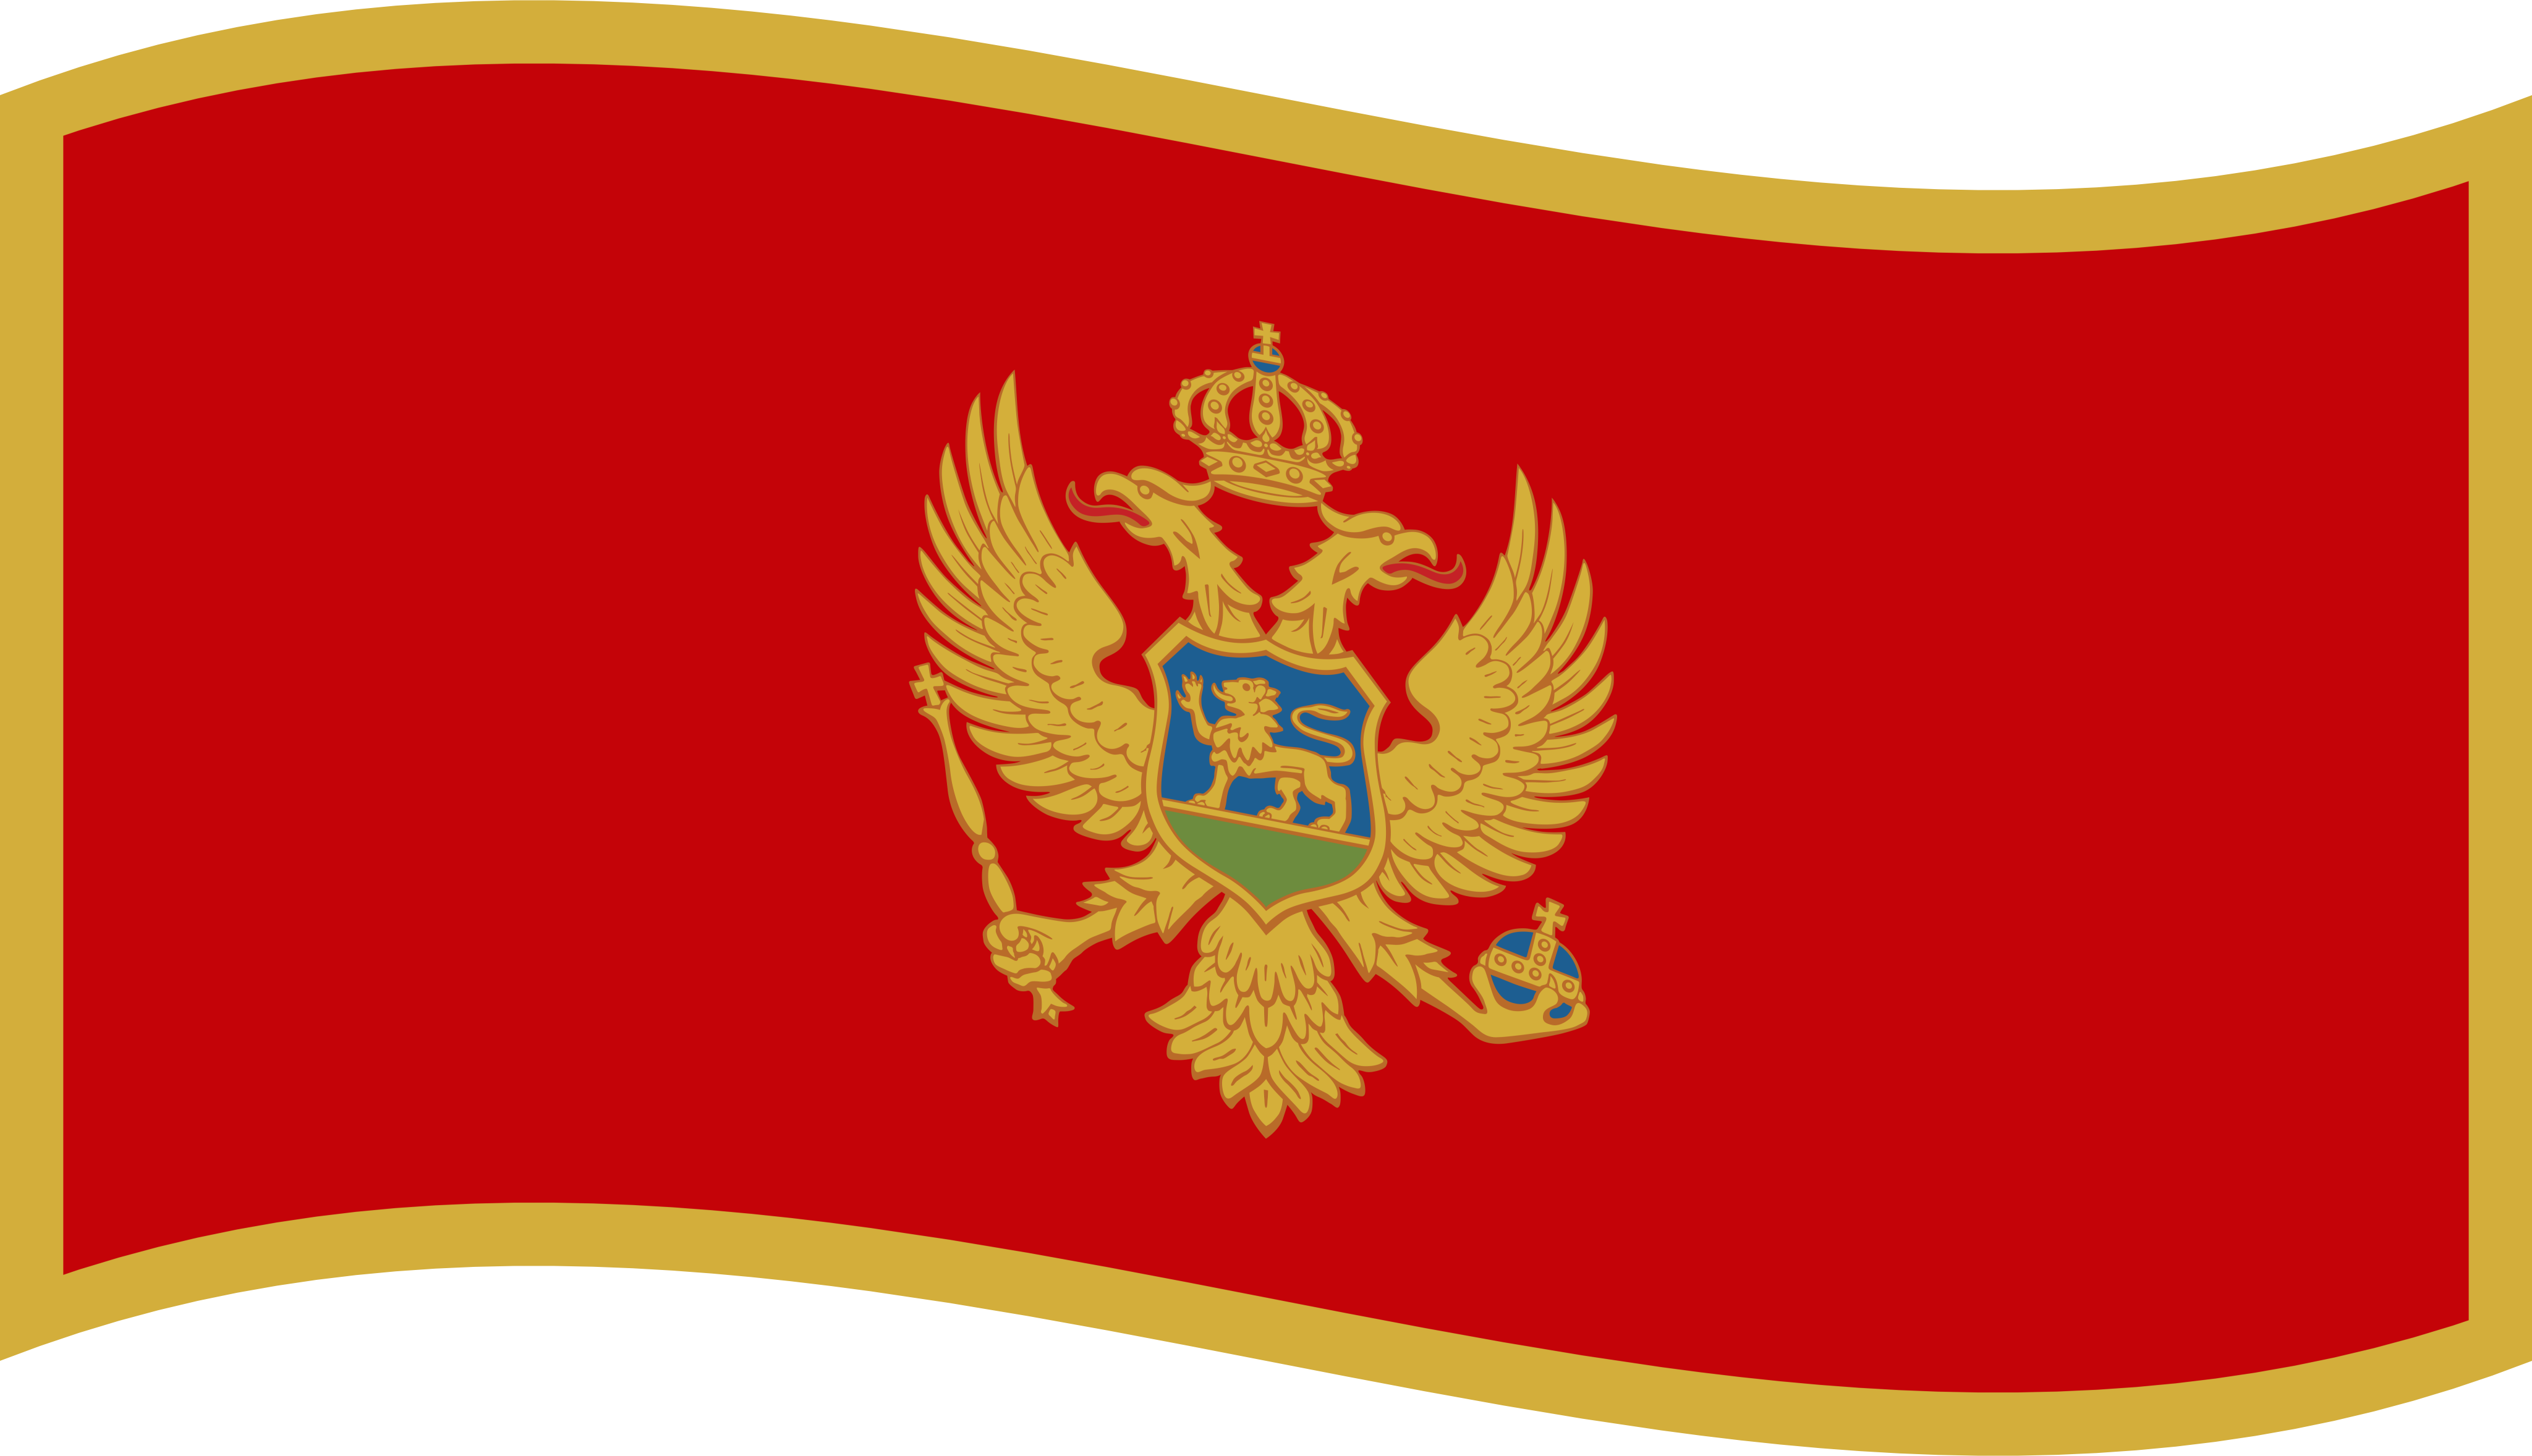 A Red Flag With A Gold Eagle And A Crown